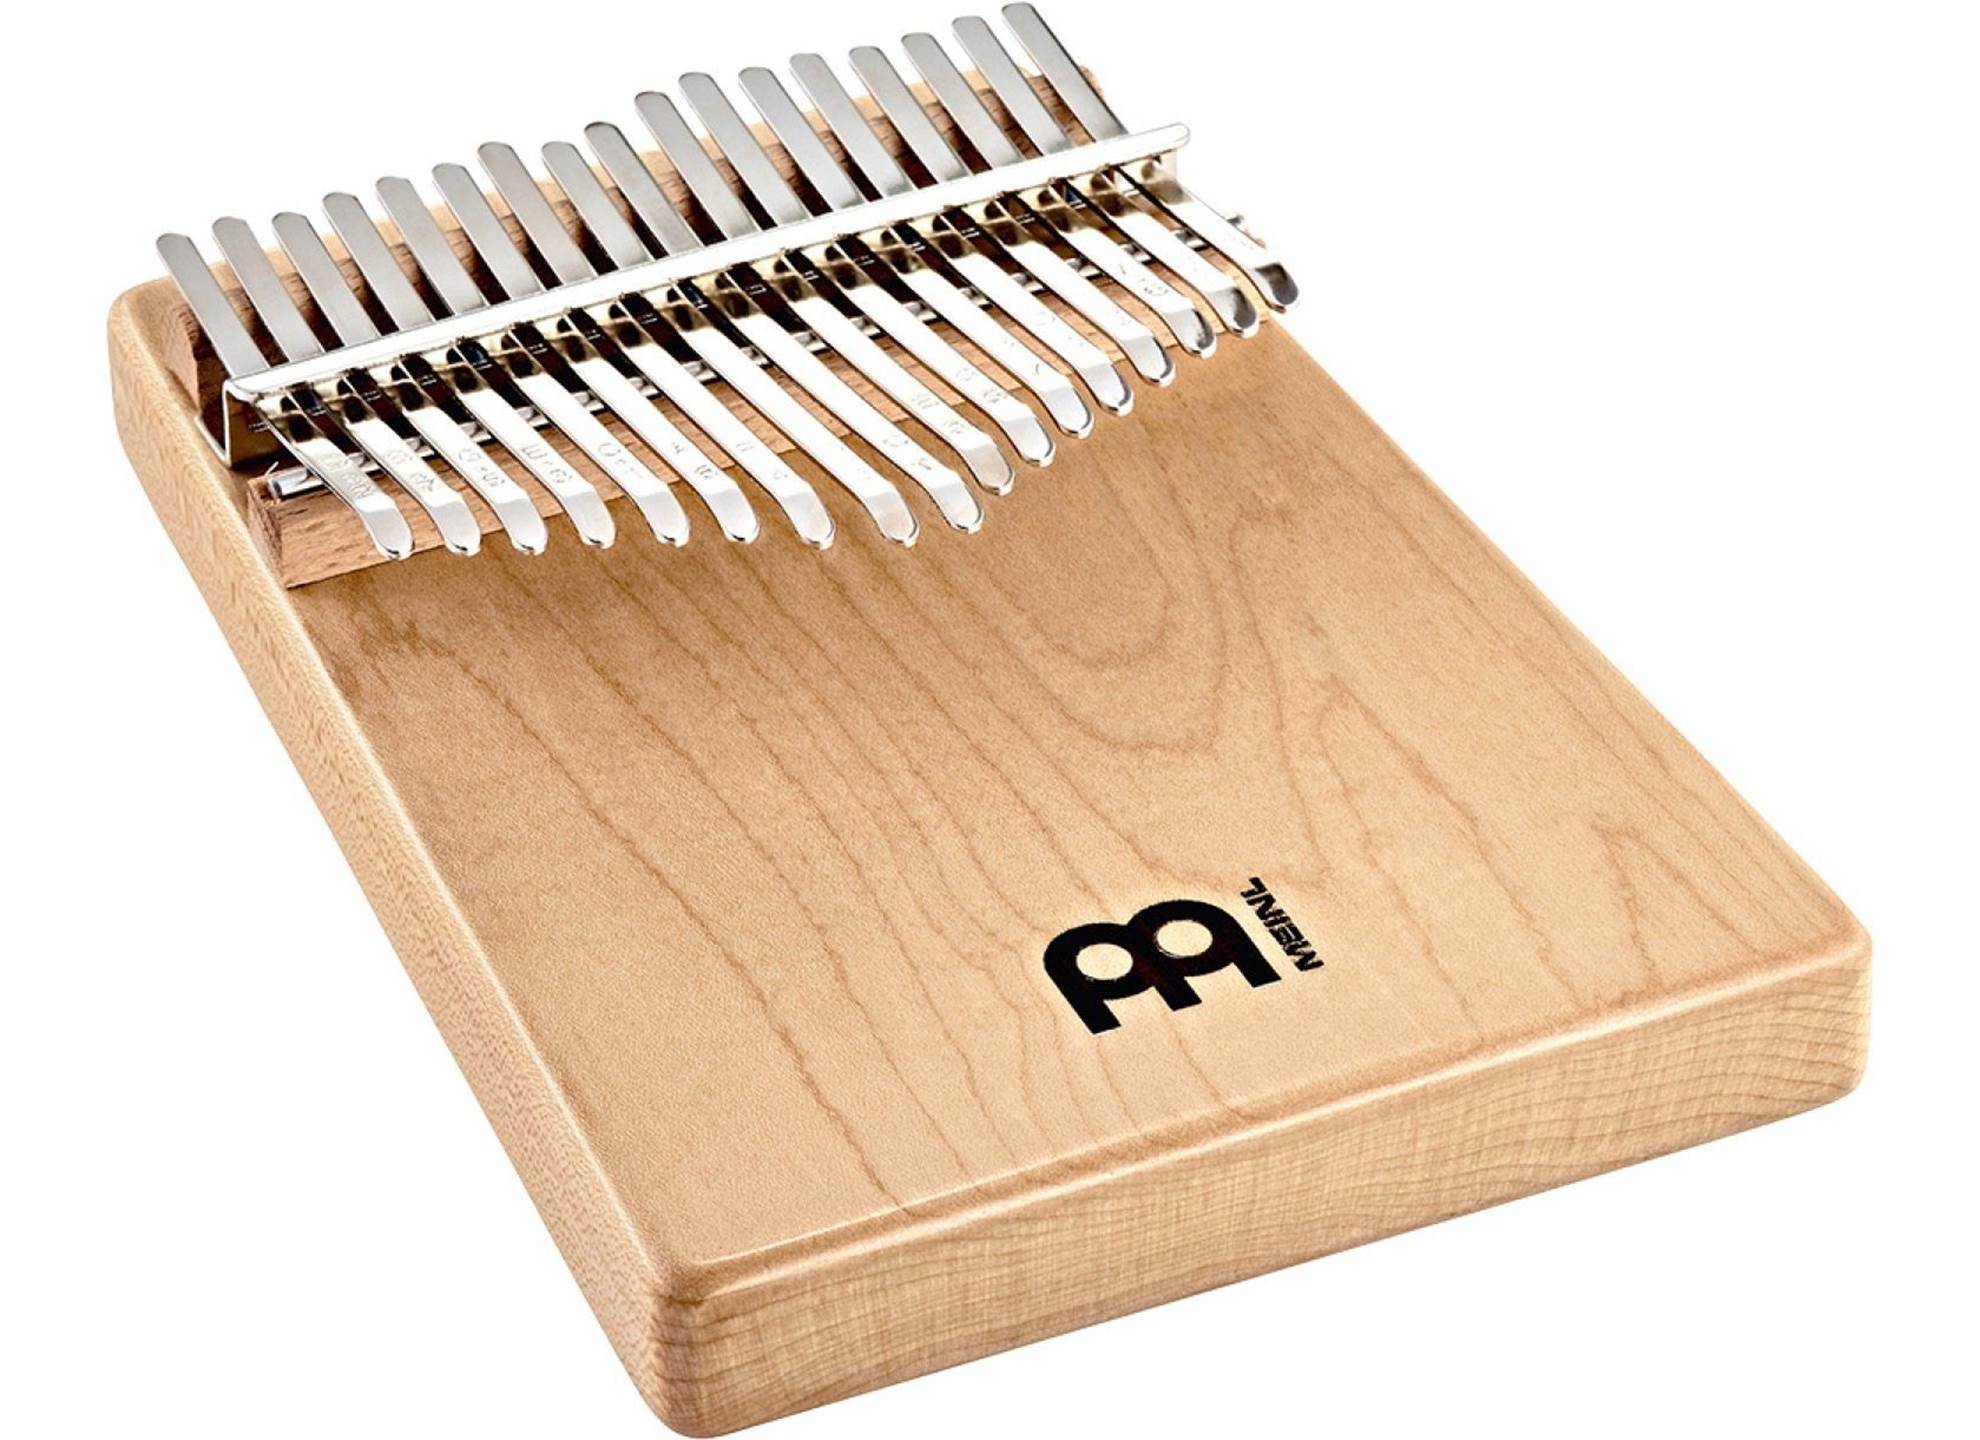 KL1704S Kalimba Solid C Major 17-Notes Maple